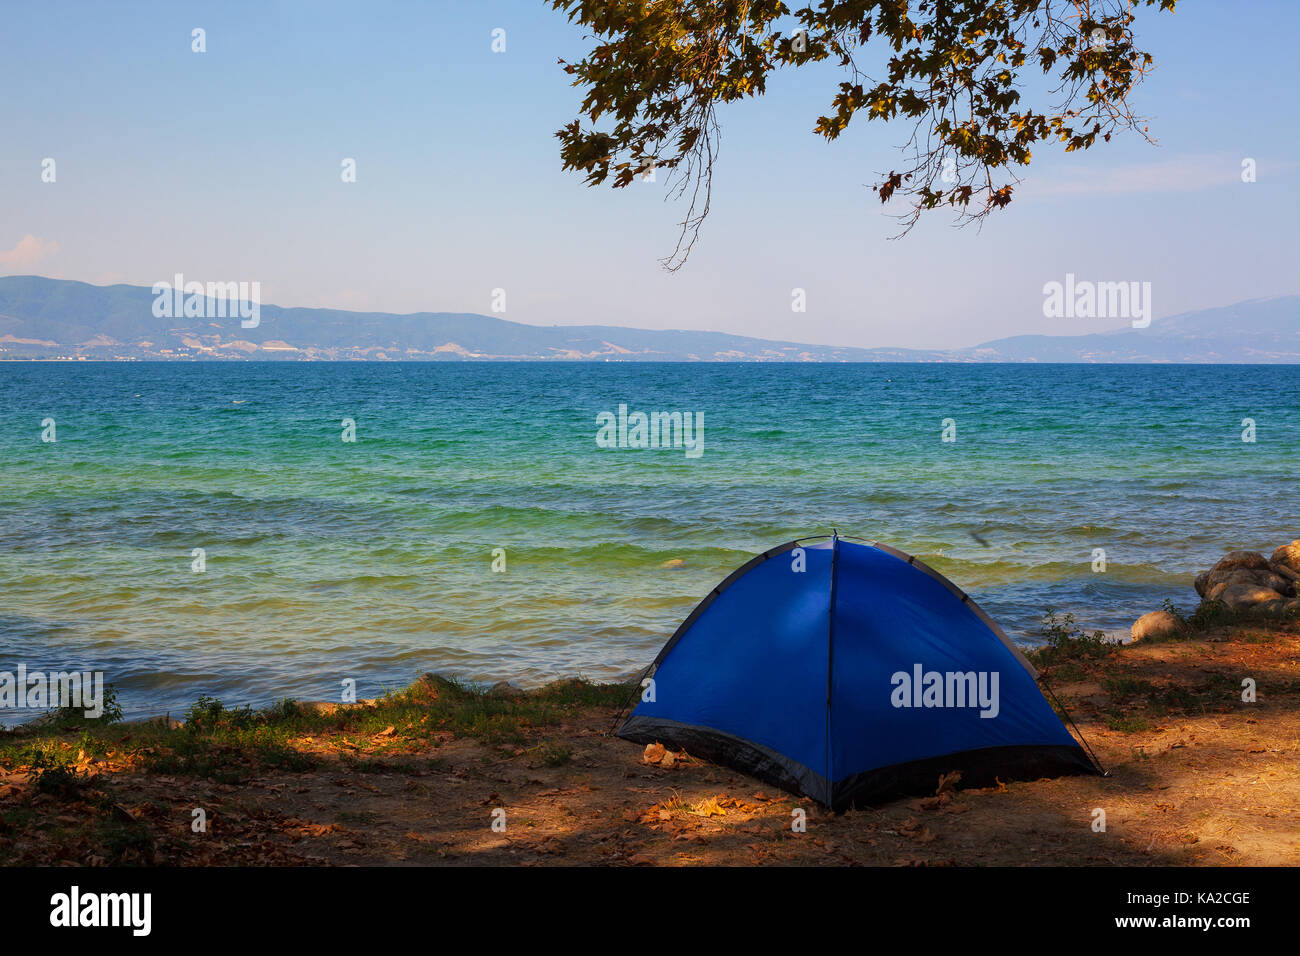 Beach of Stavros town in Greece, one blue tent under the trees with beautiful view on seaside. Stock Photo